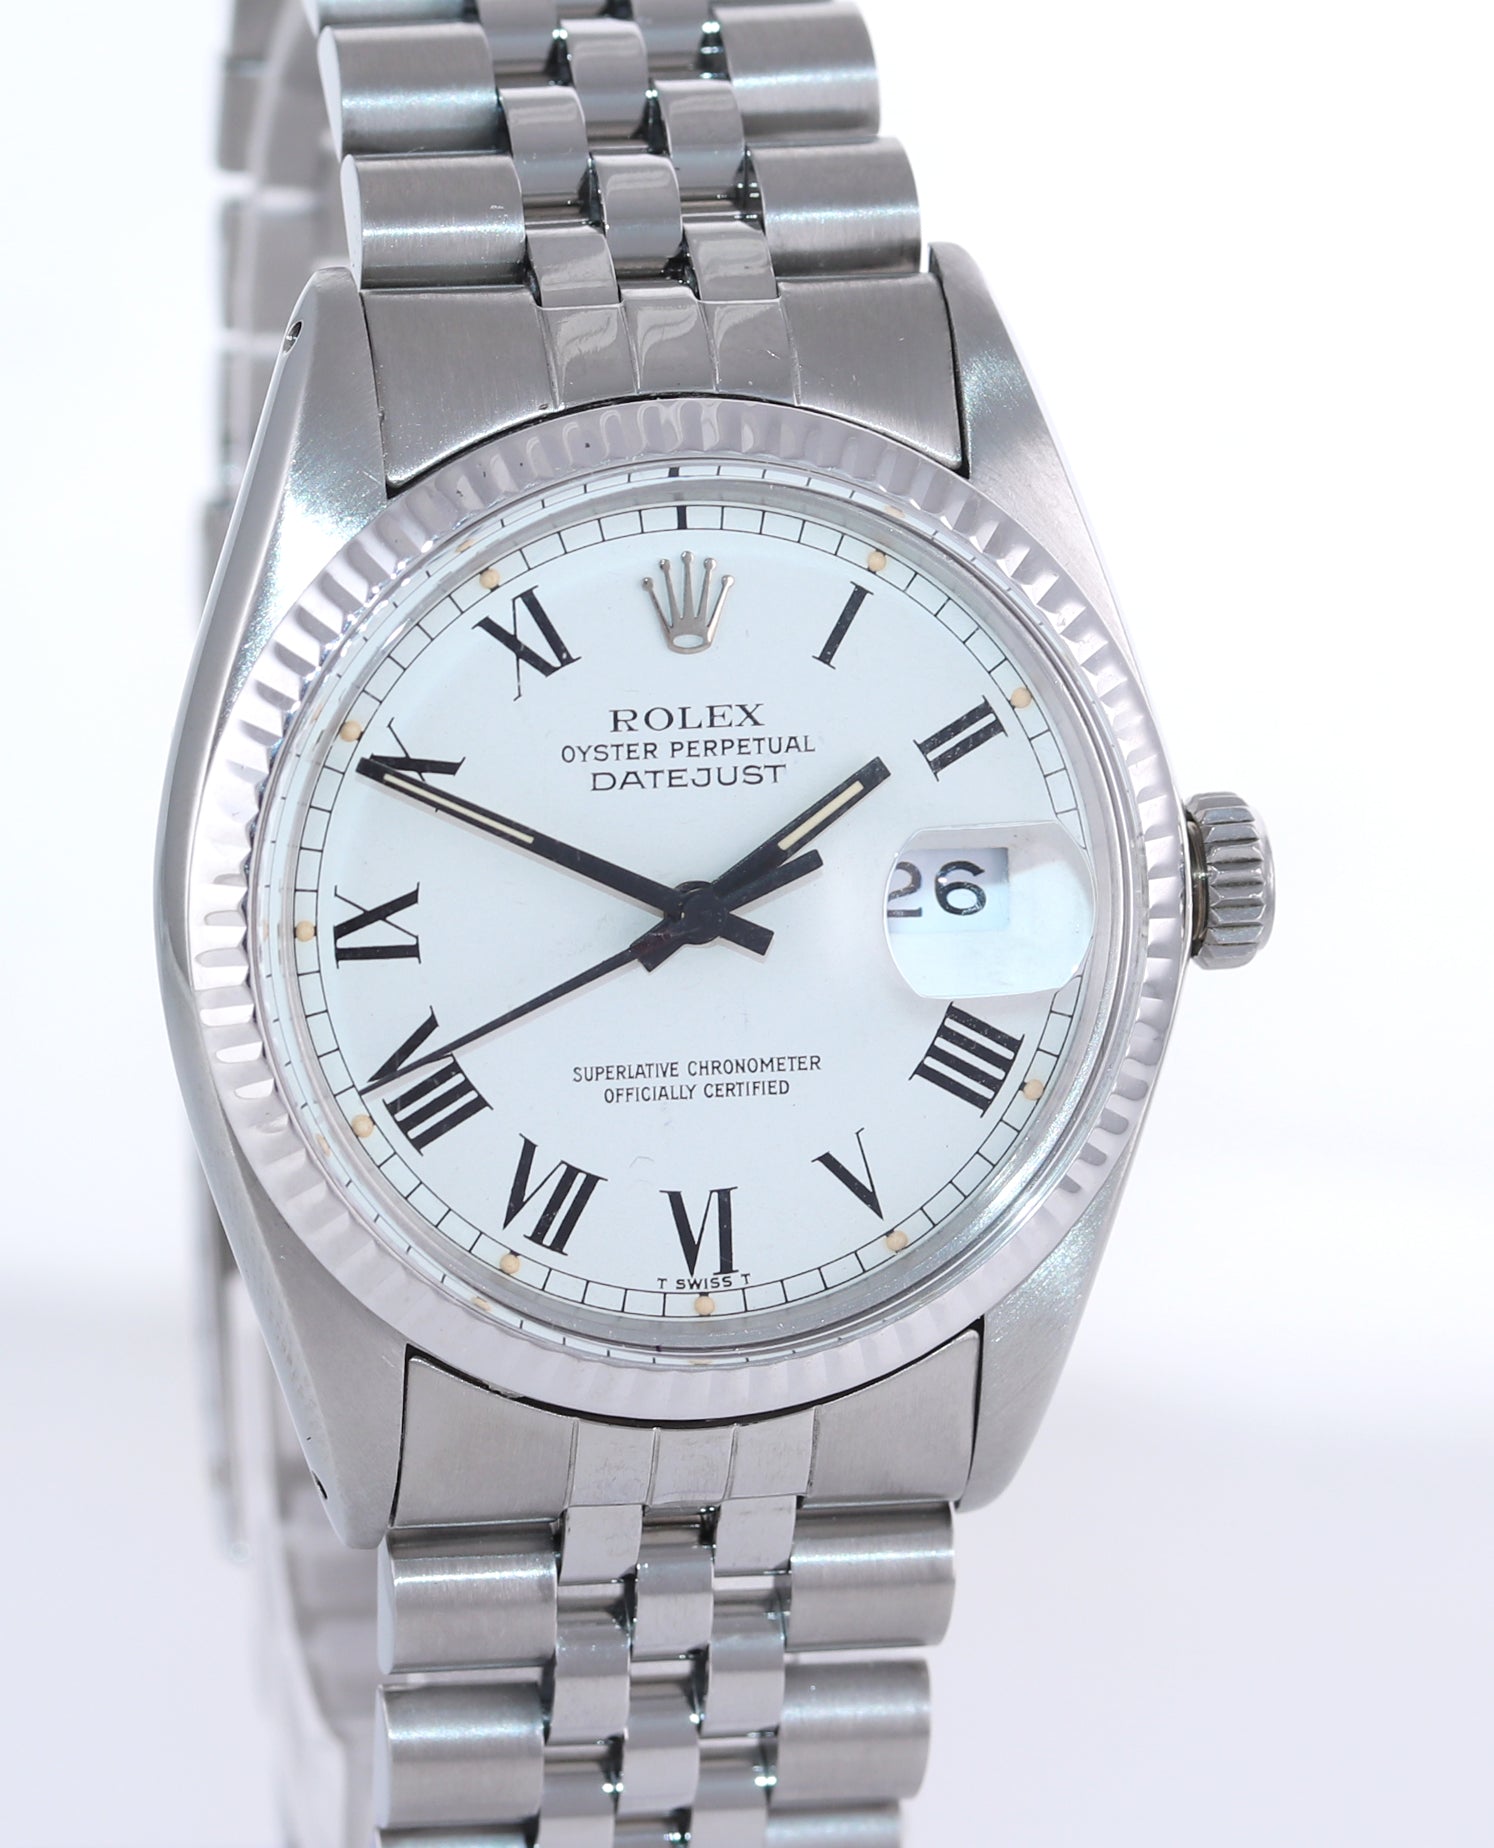 Rolex DateJust 36mm 16014 Steel White Buckley Roman Dial White Gold Fluted Watch